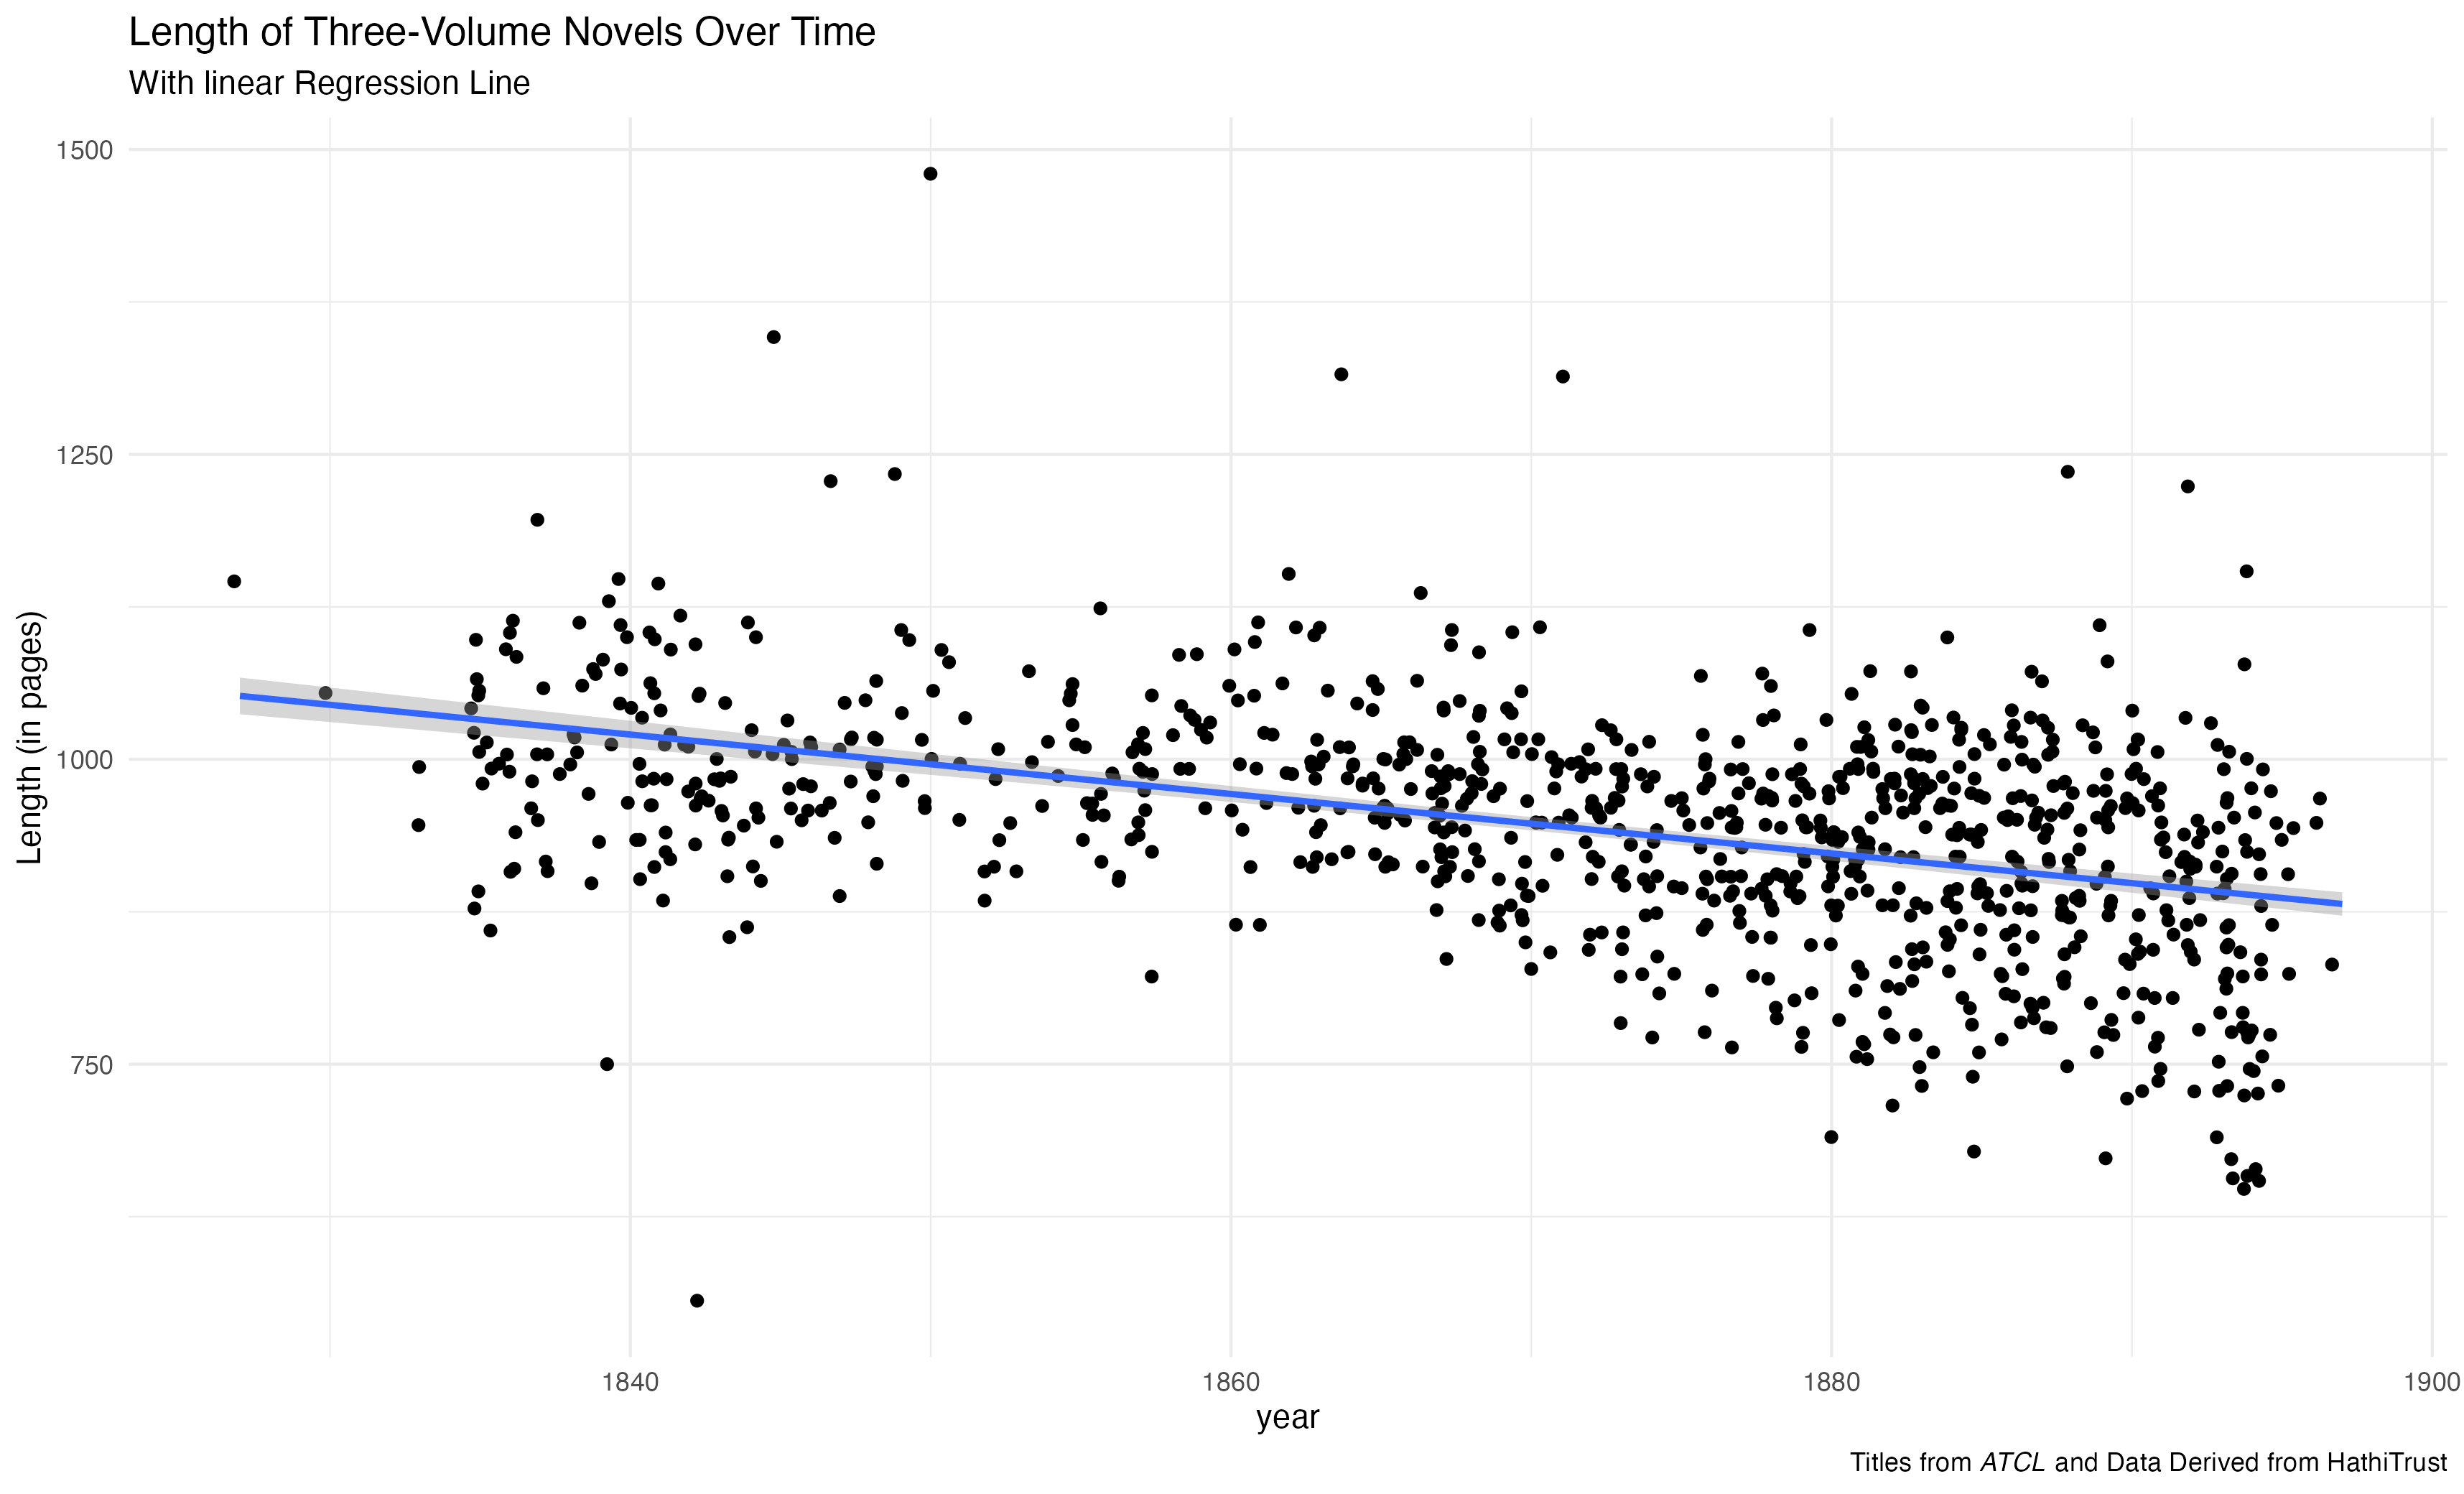 Scatter Plot Showing Length of Three-Volume Novels (in words) Over time